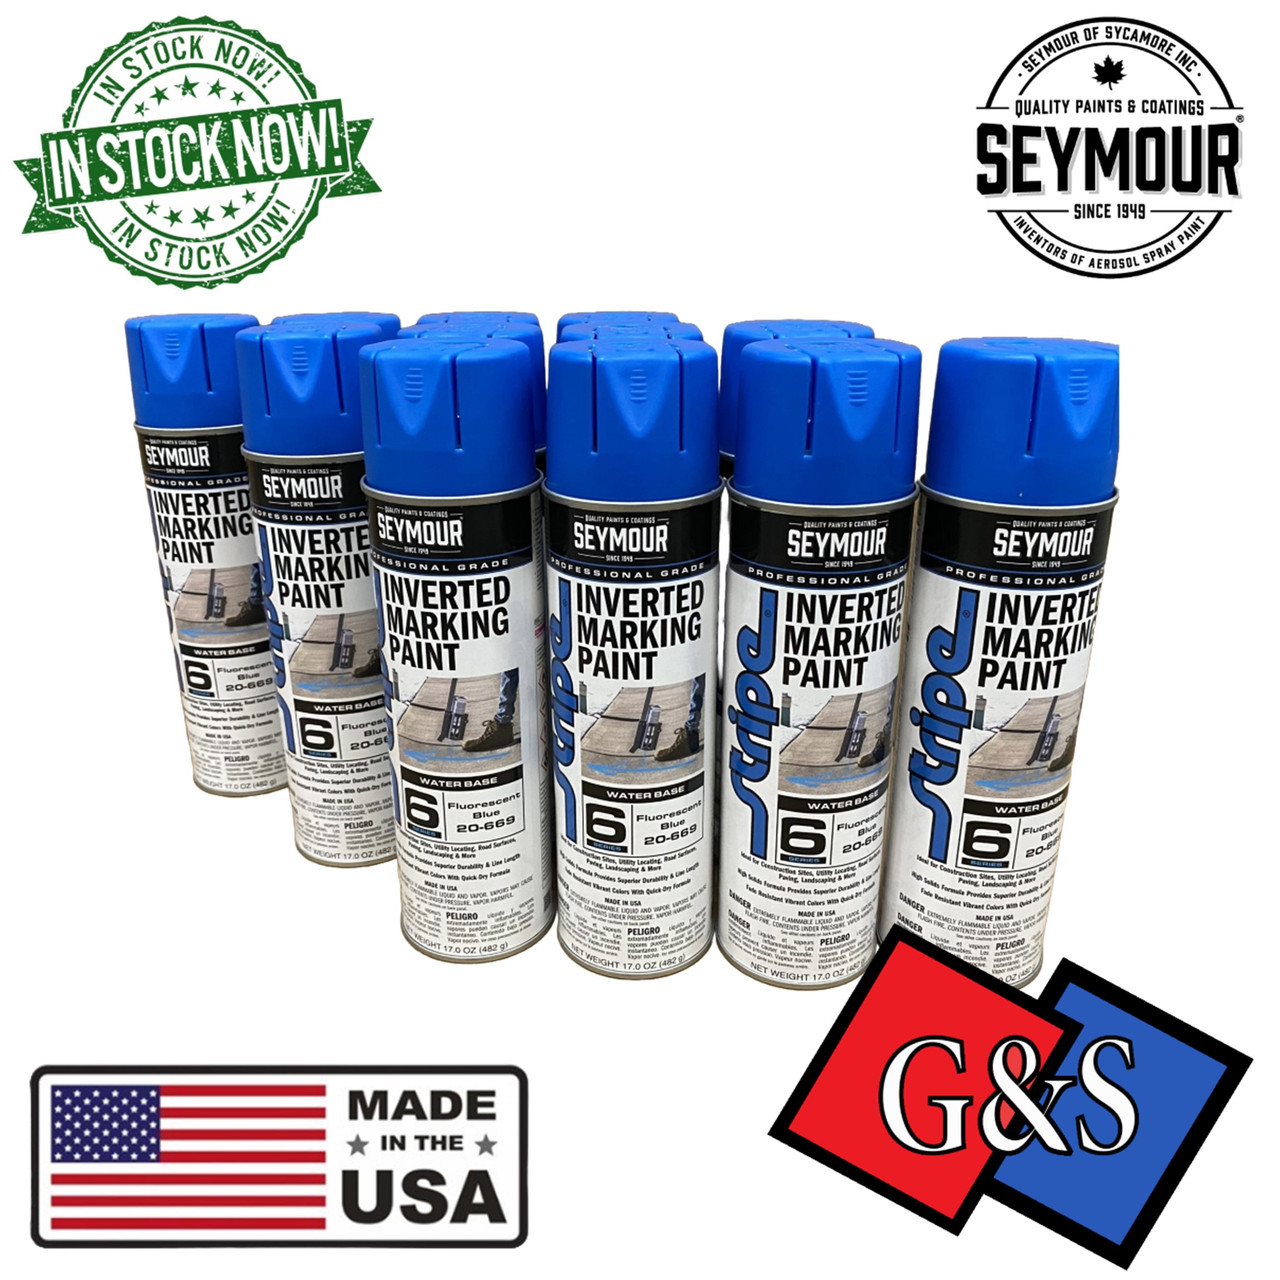 Seymour Fluorescent Blue Inverted 20-669 (WATER BASED)  17 oz., Marking Paint - 12 CANS